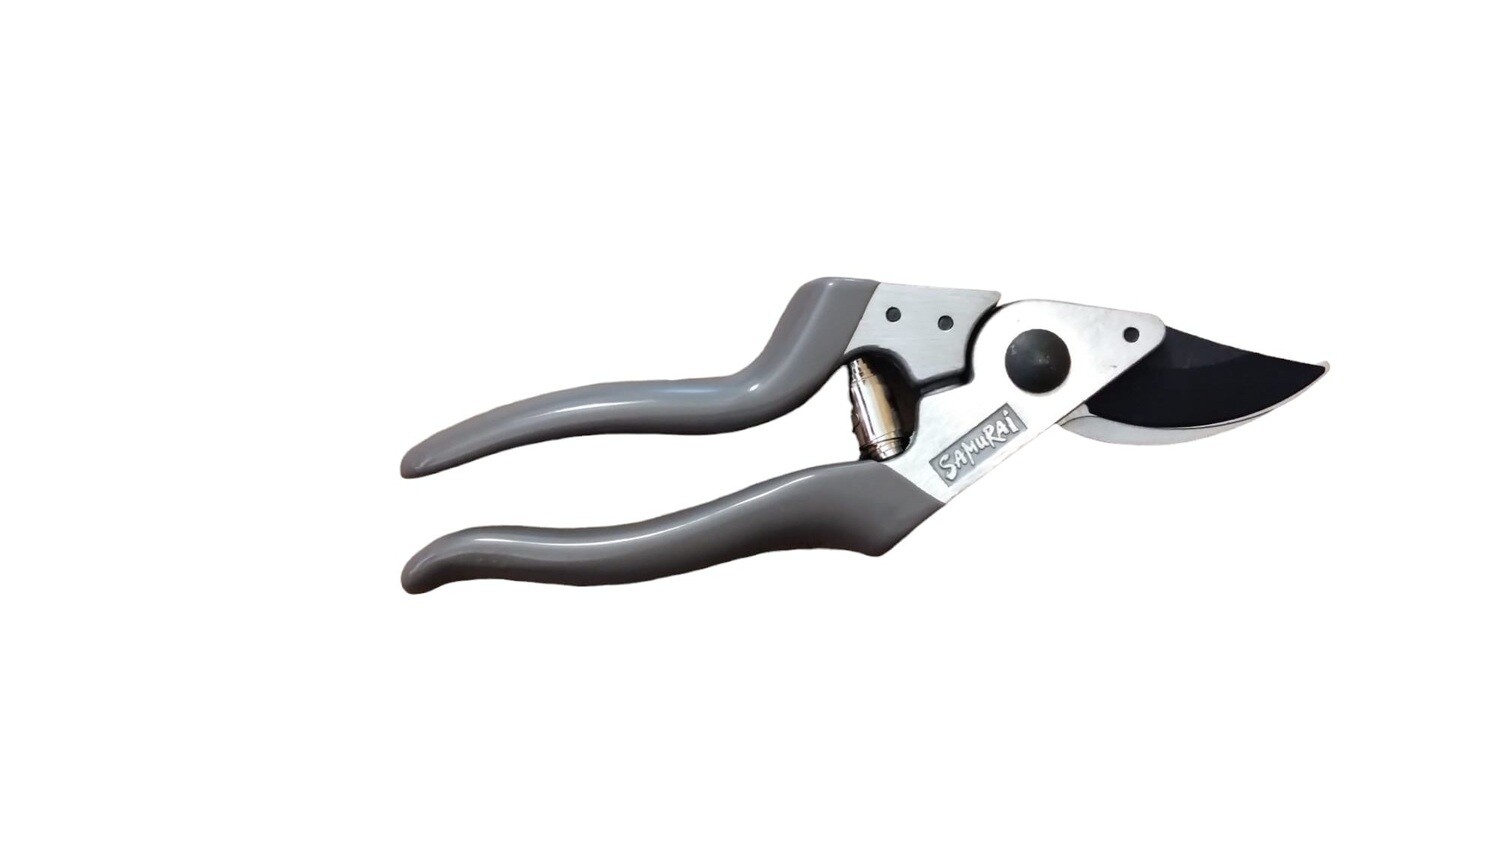 High performance secateurs with Teflon coated blade